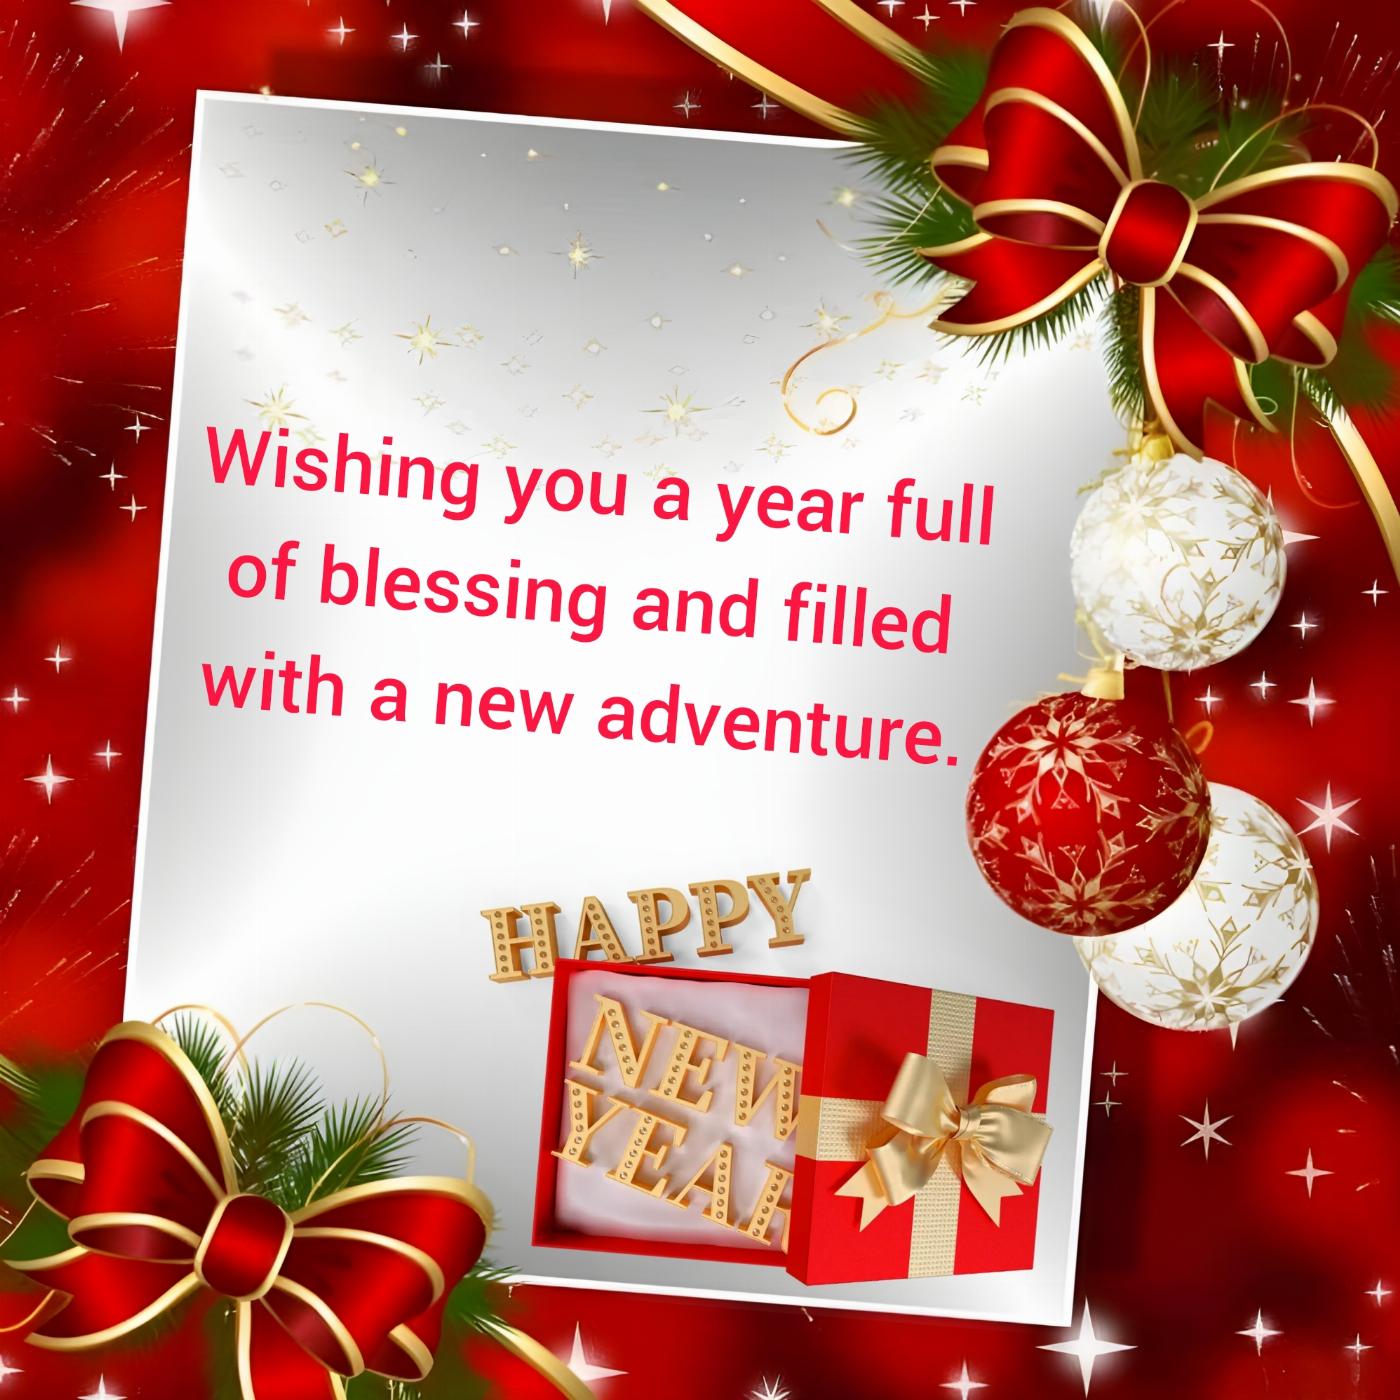 Wishing you a year full of blessing and filled with a new adventure